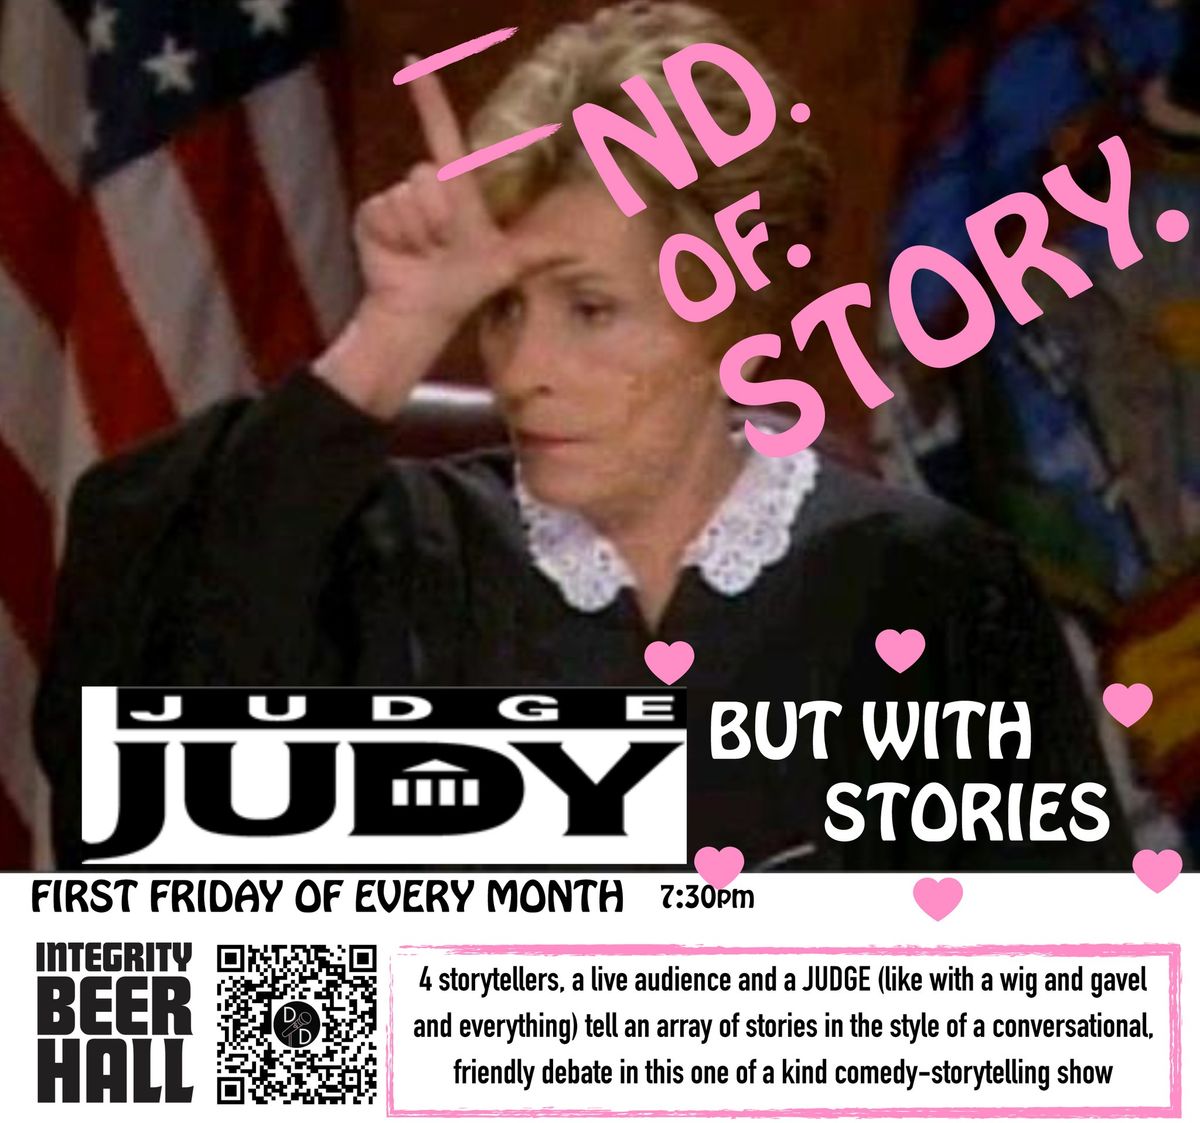 END. OF. STORY. (Monthly Storytelling Show in Portland)